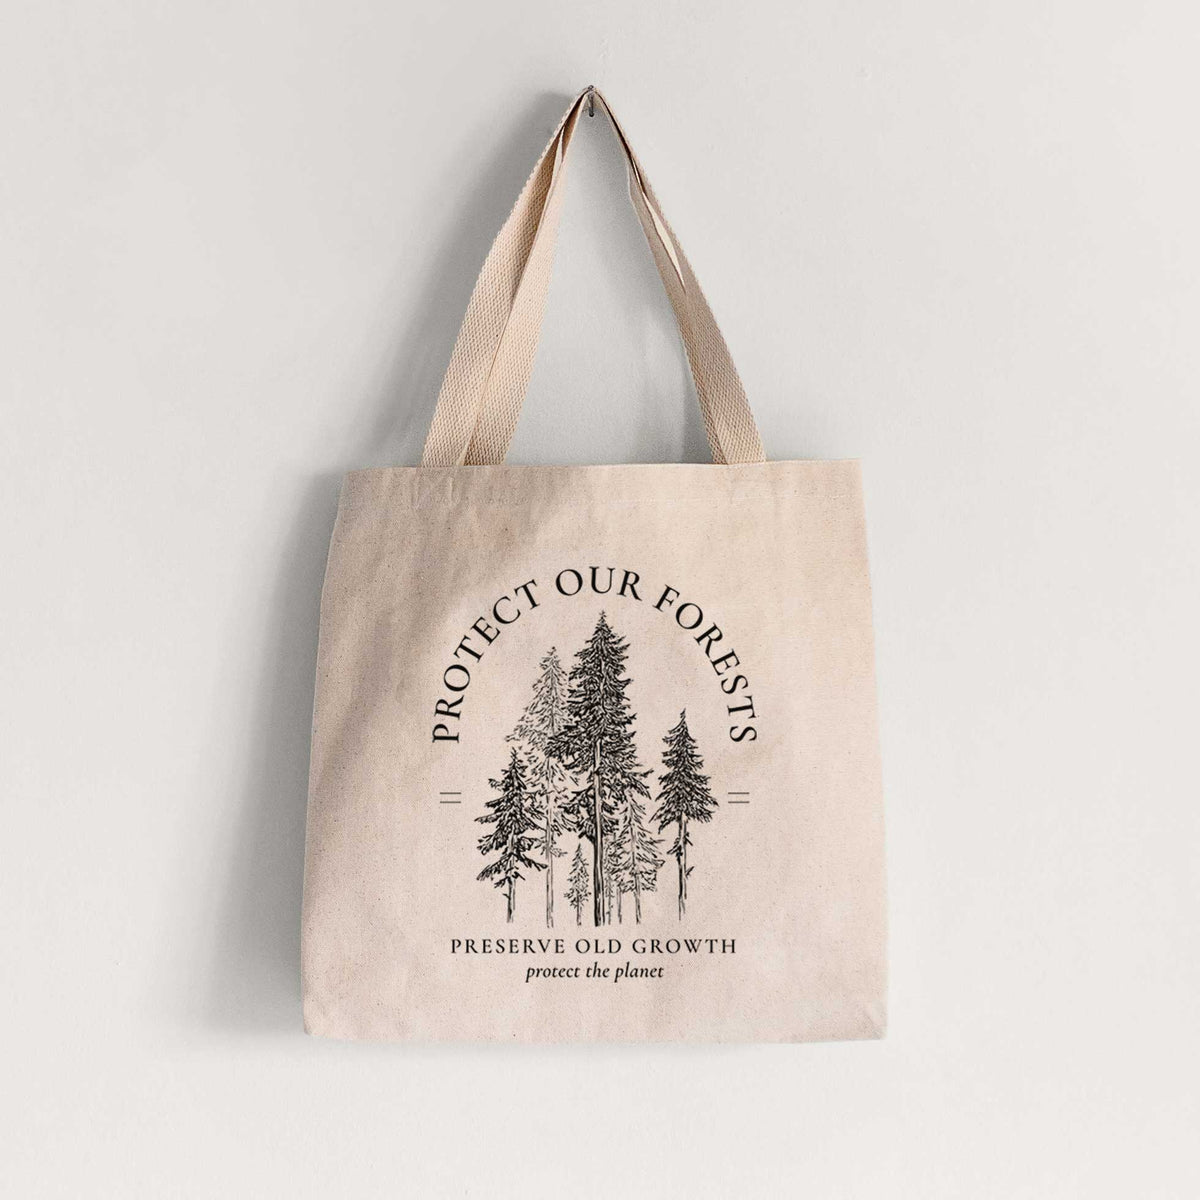 Protect our Forests - Preserve Old Growth - Tote Bag